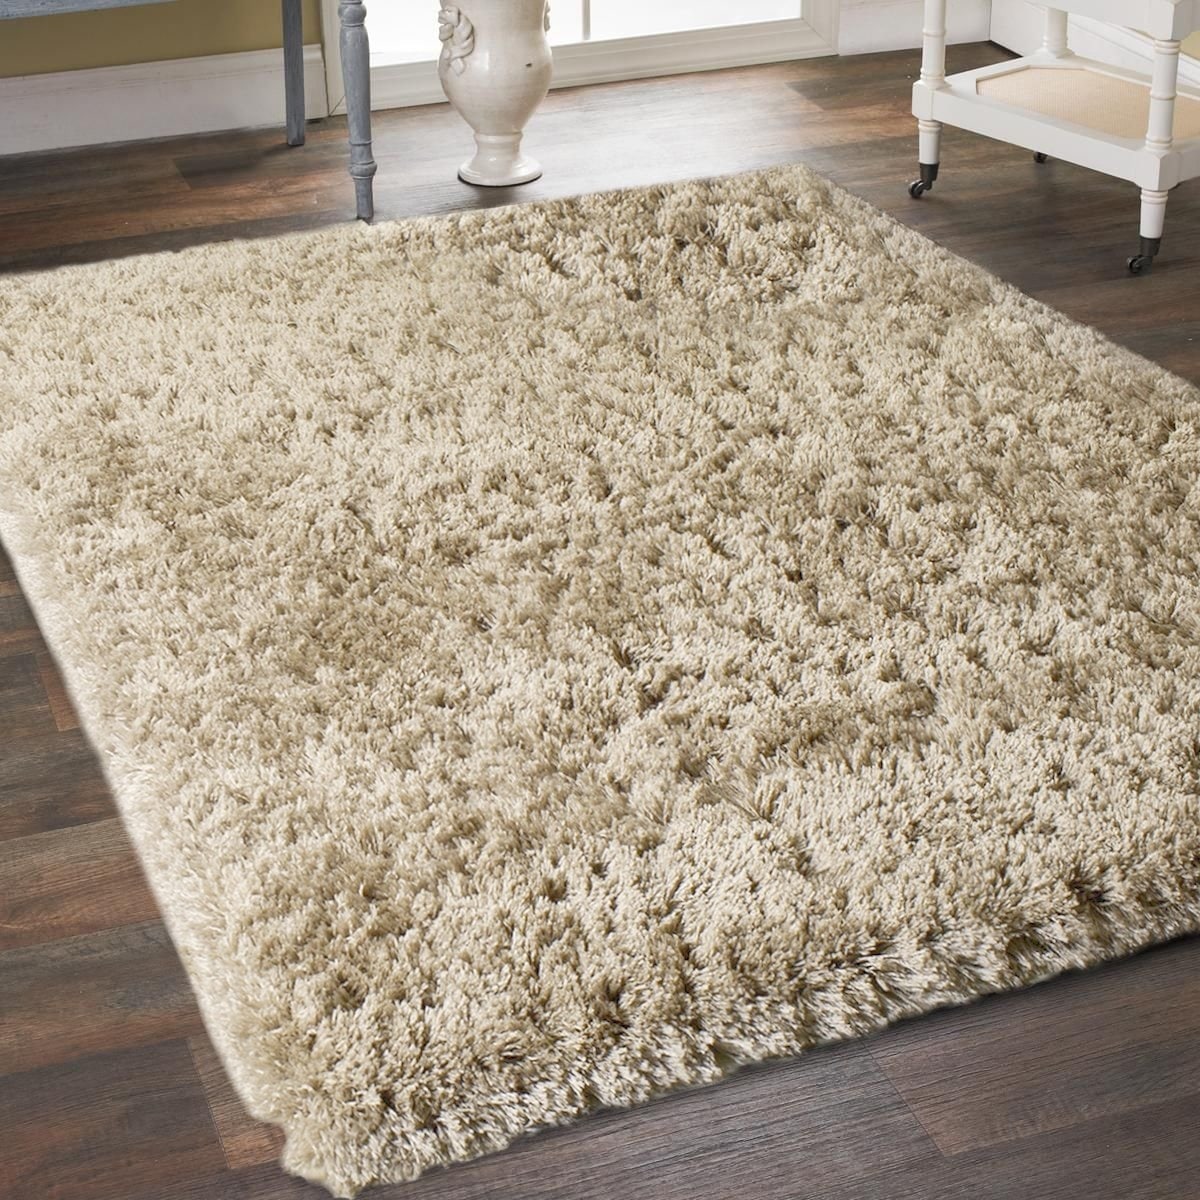 Contemporary Retro Polyester Textured Two Length 2 Pile Yarn Easy Clean Stain Fade Resistant Shimmer Shag Ocean Blue Solid Plain Modern Luster Ultra Thick Soft Plush Area Rug 3 x 5 3'3 x 5'